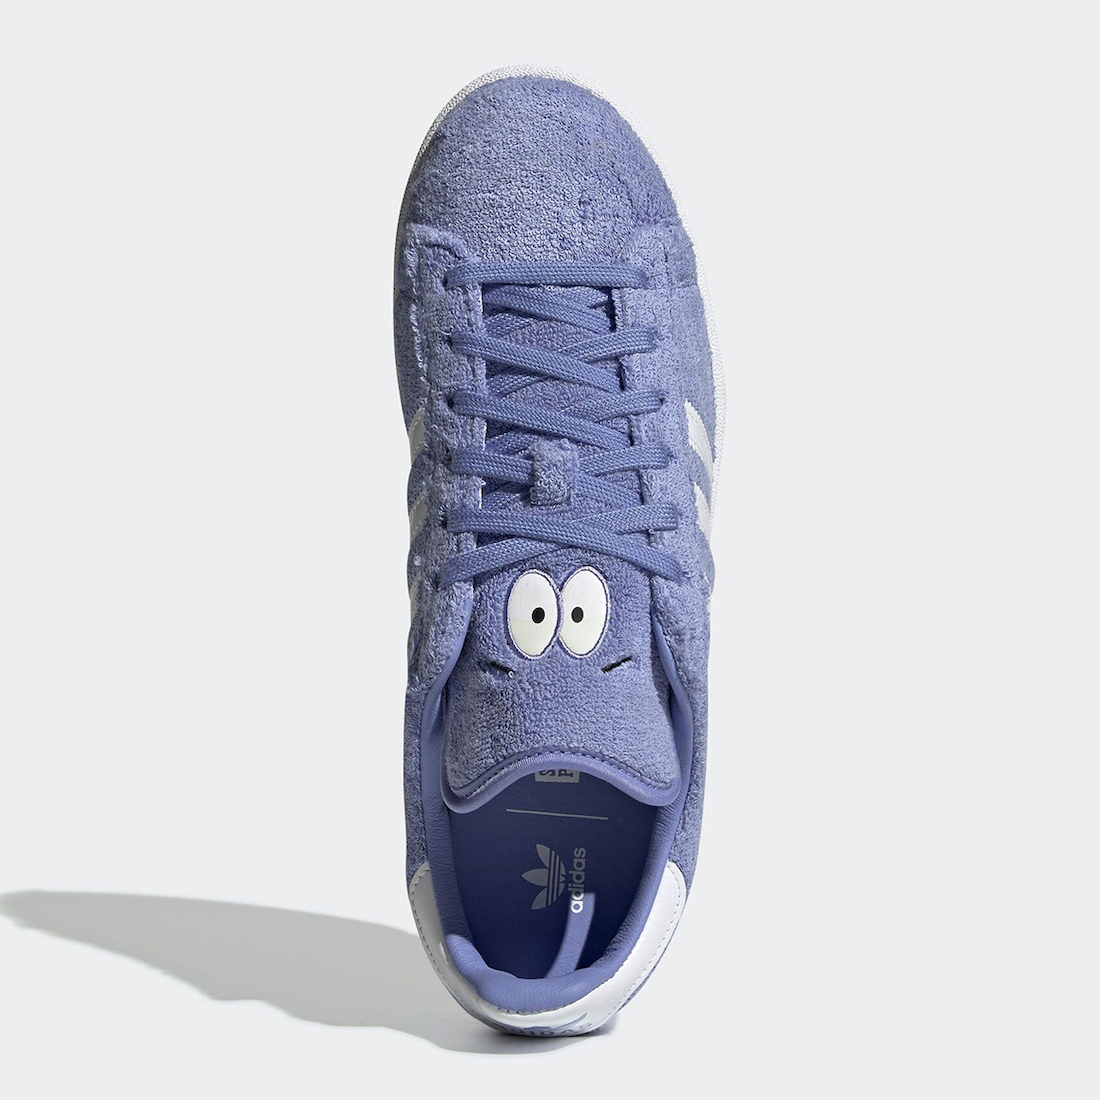 South-Park-adidas-Campus-80s-Towelie-GZ9177-Release-Date-4